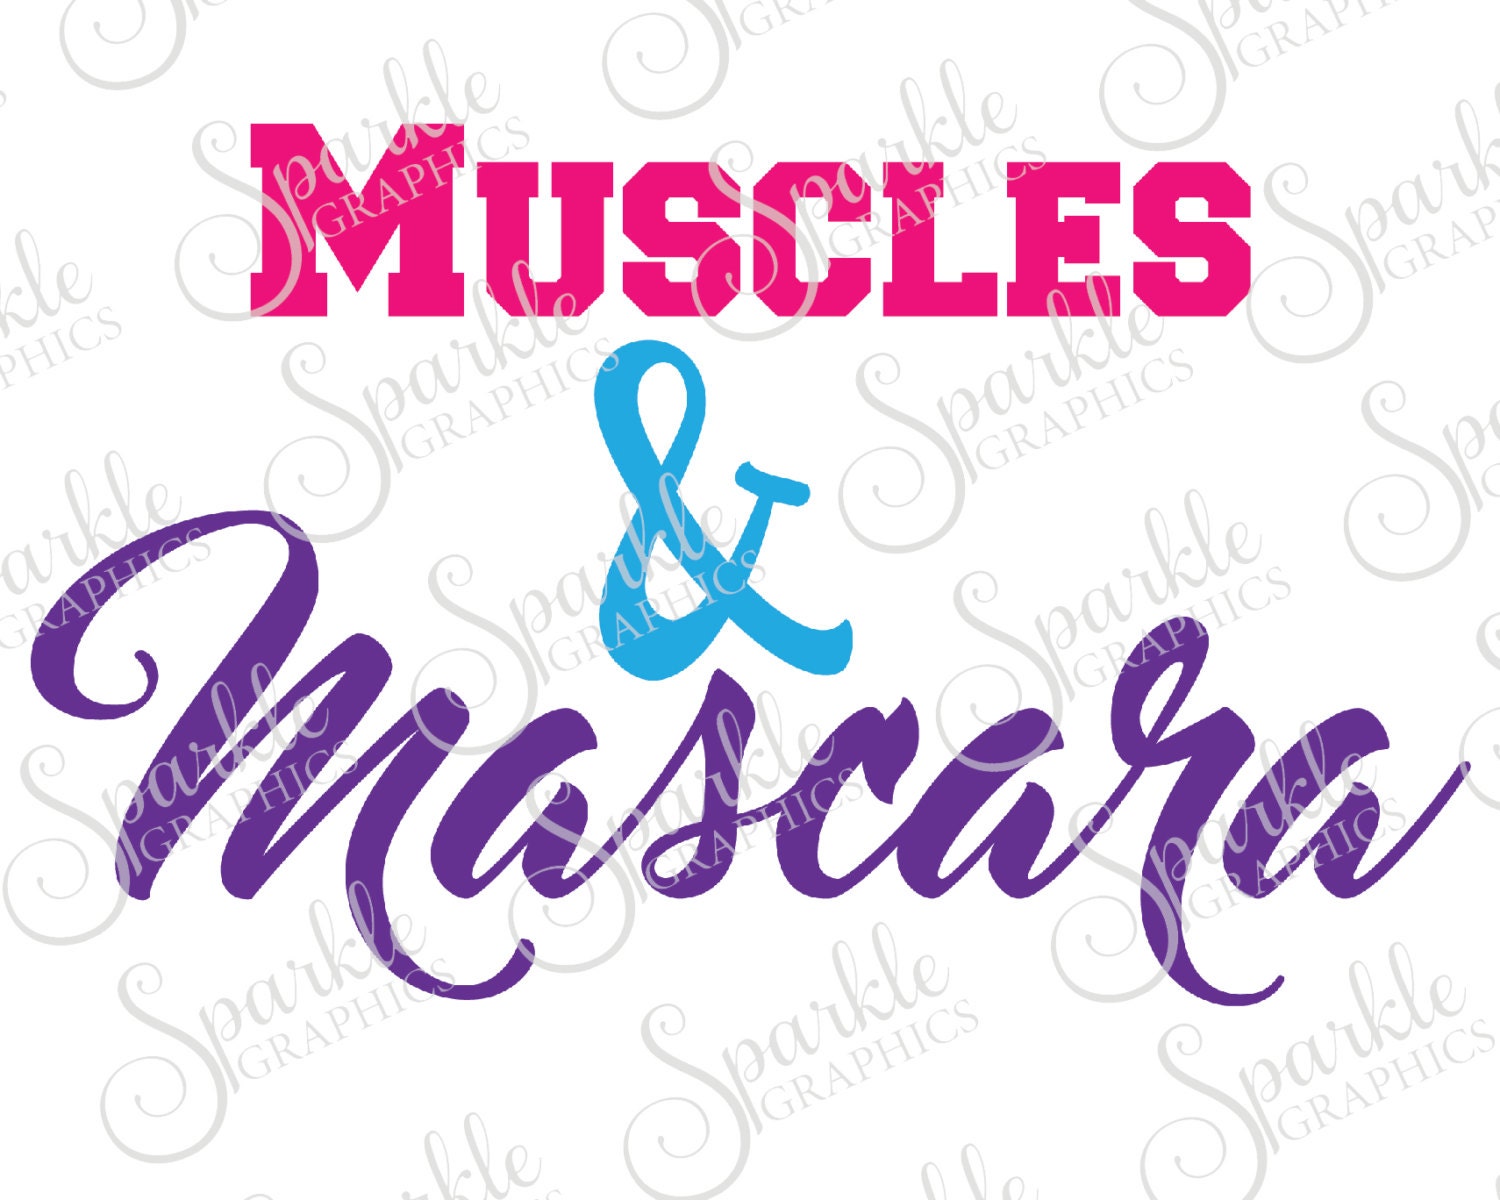 Download Muscles And Mascara File Fitness SVG Workout Gym Ladies Weight